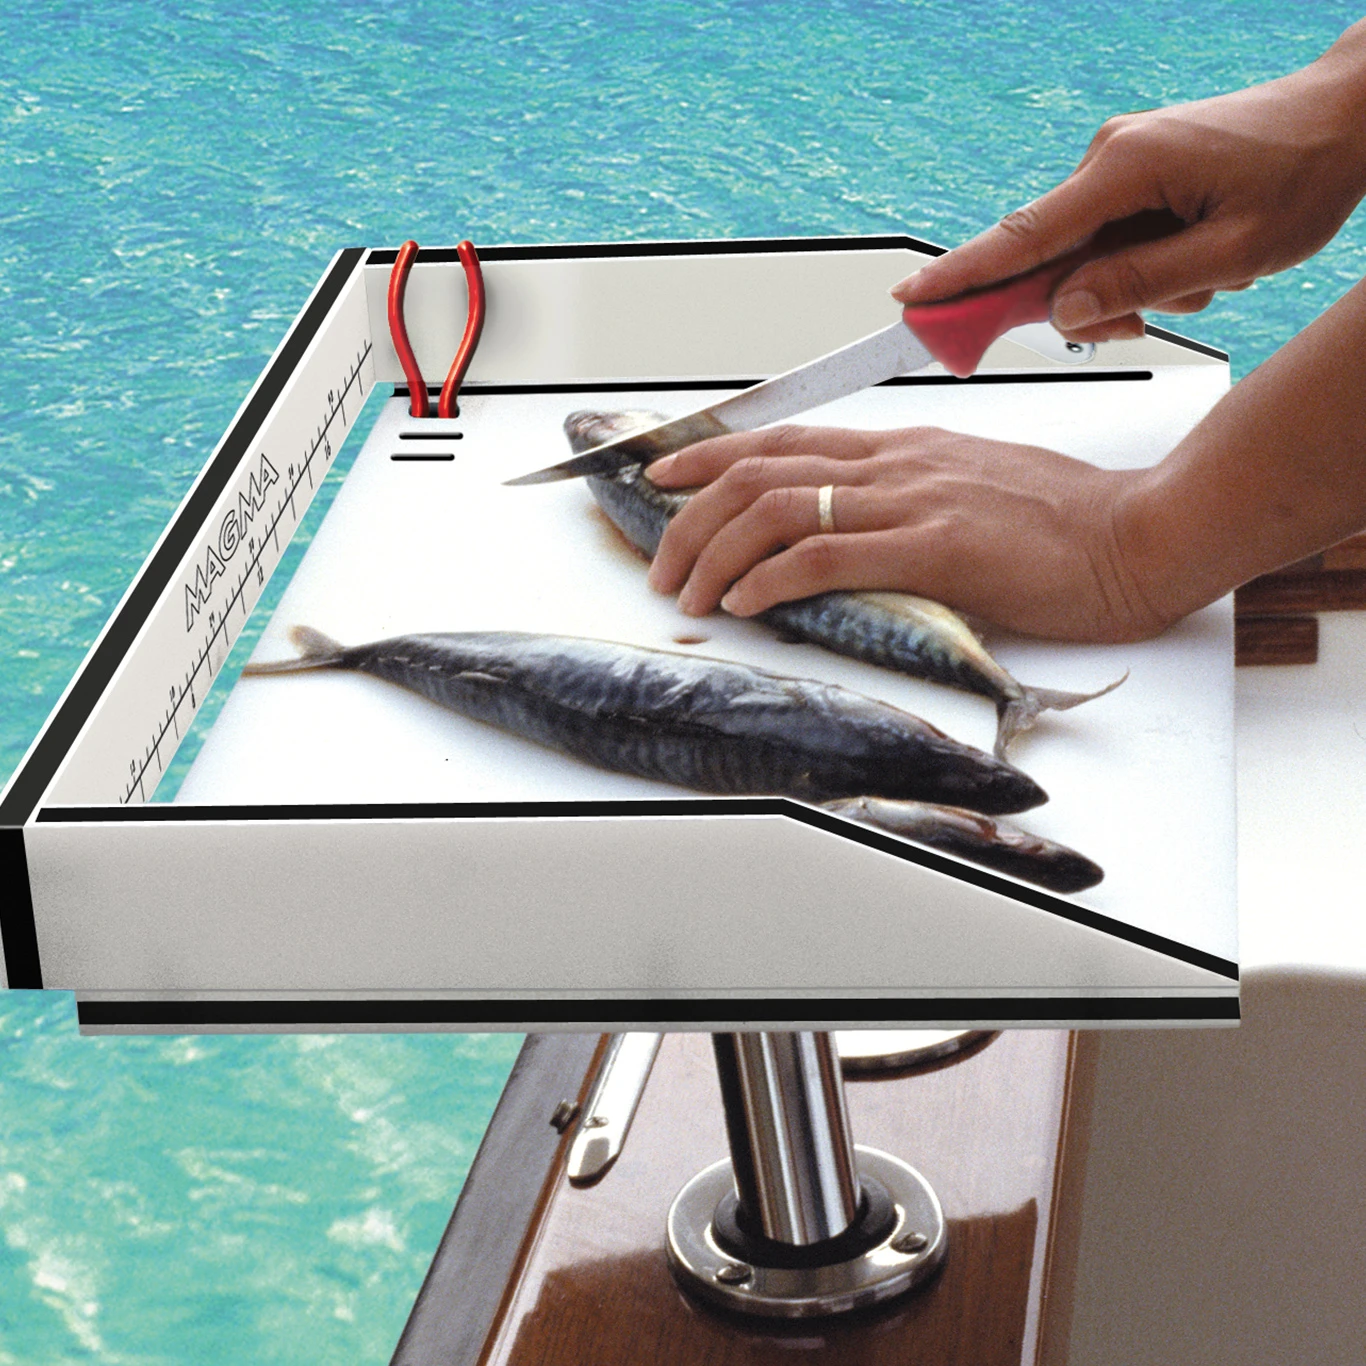 Cleaning Station with Level Lock, Pontoon Boat Table